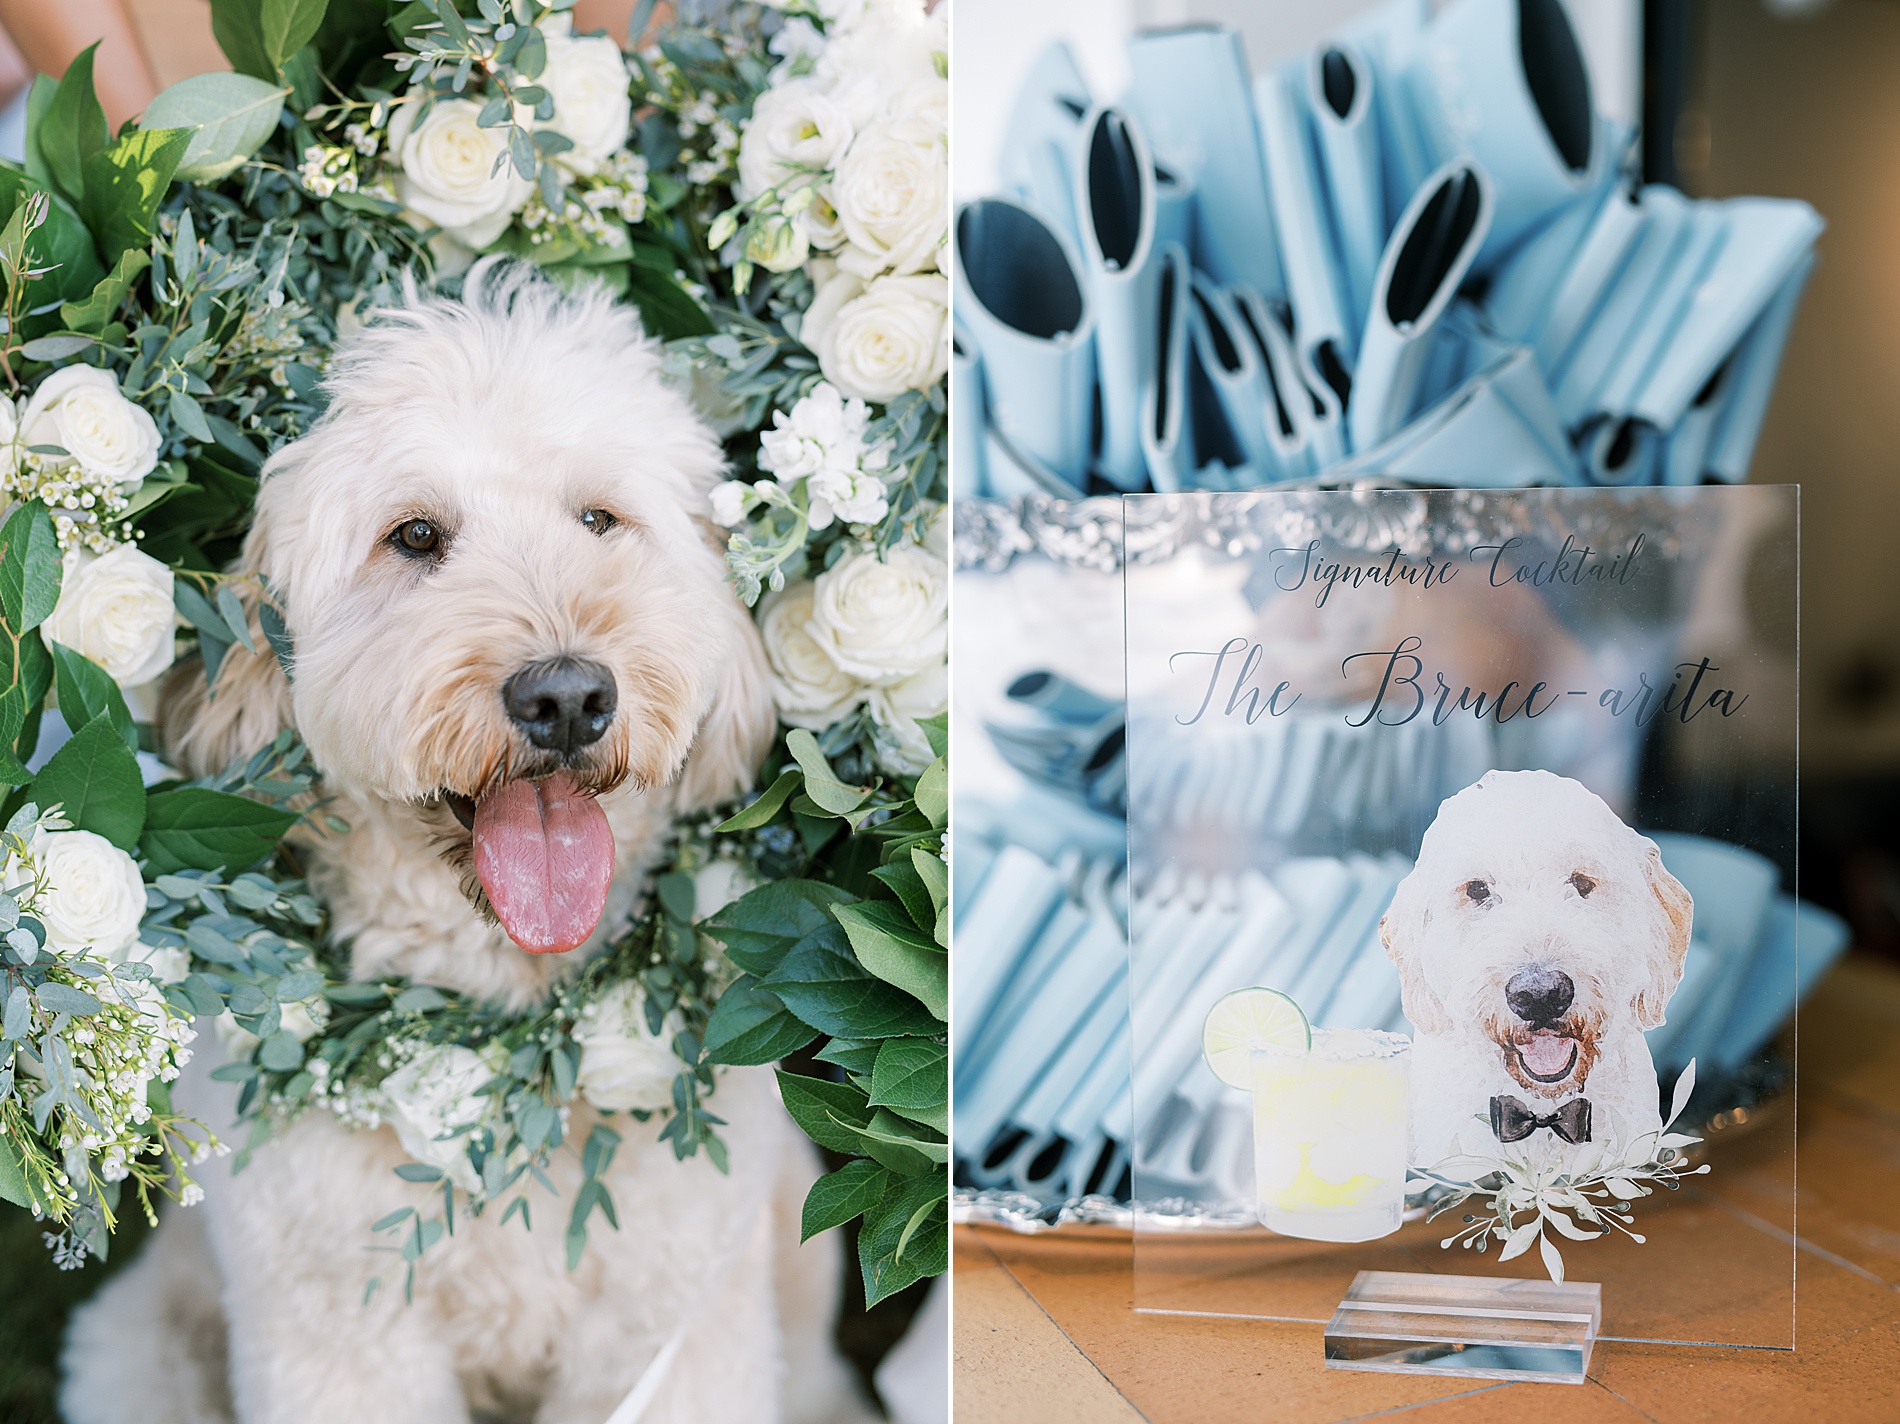 bride and groom's dog and details from wedding 